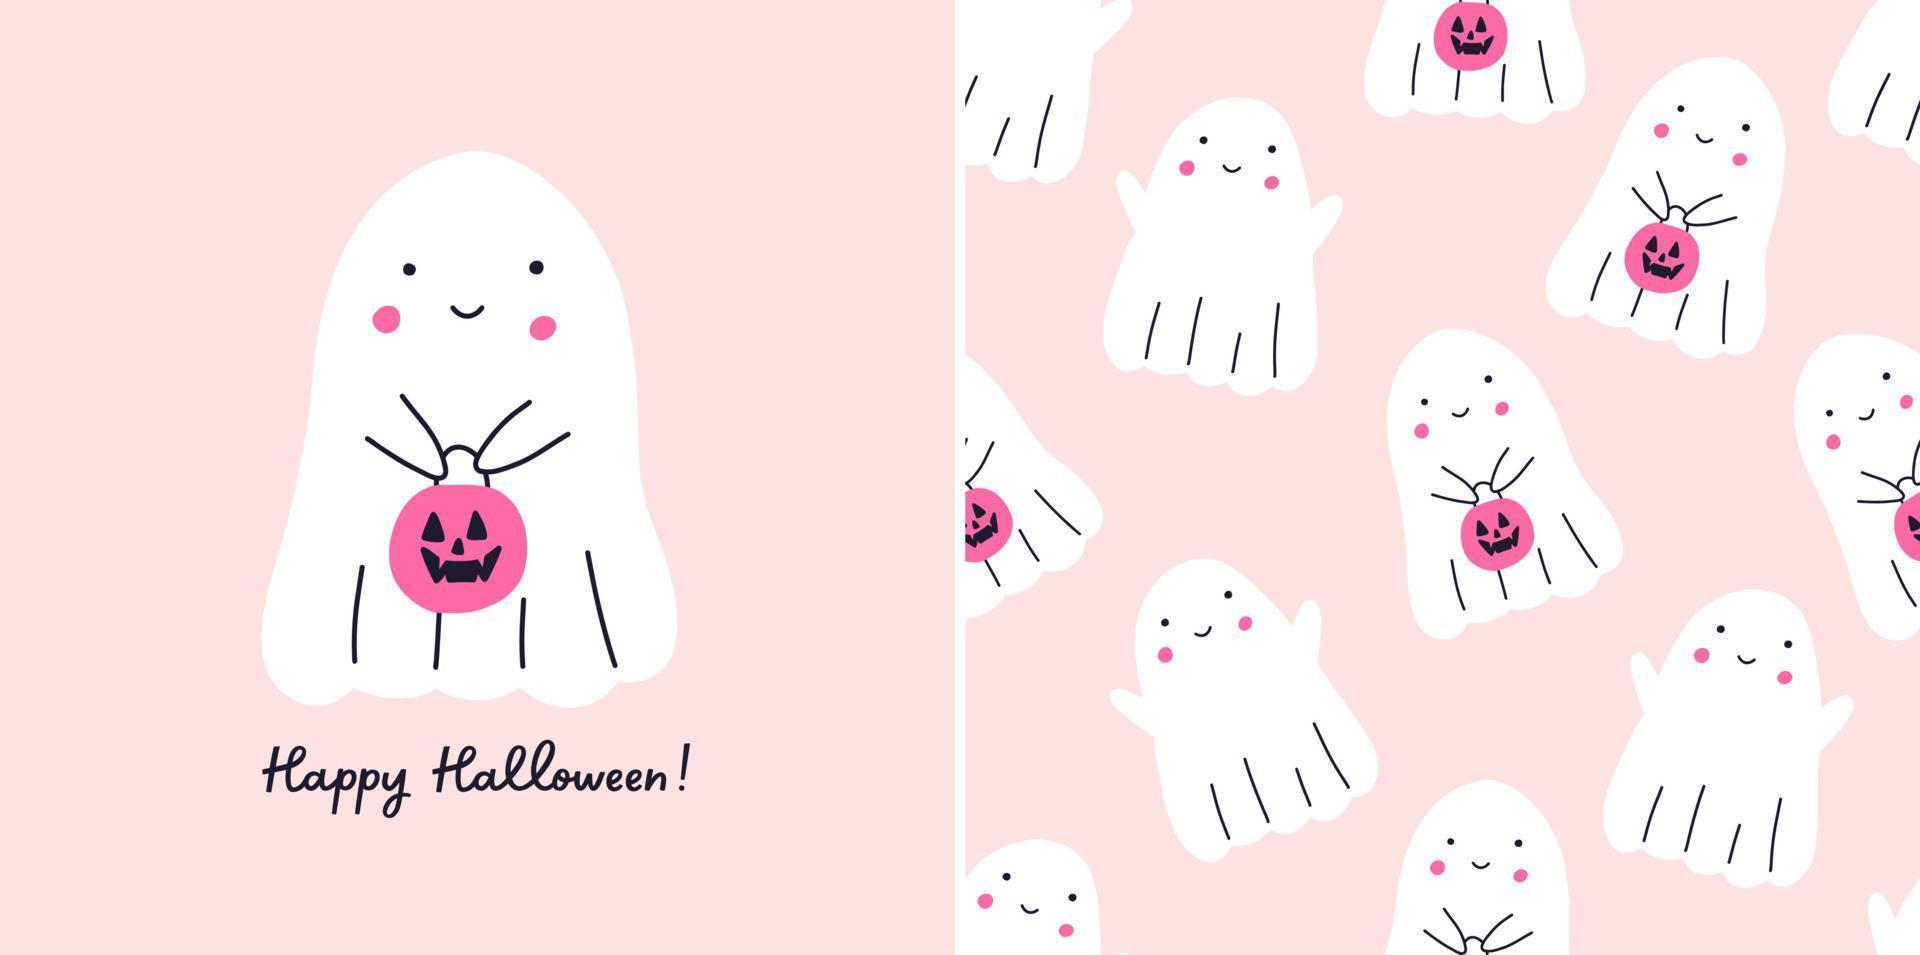 Cute ghost pastel pink seamless pattern and greeting card, cartoon flat vector illustration. Happy Halloween inscription, funny ghost holding candy basket in shape of pumpkin. Trick or treat concept.